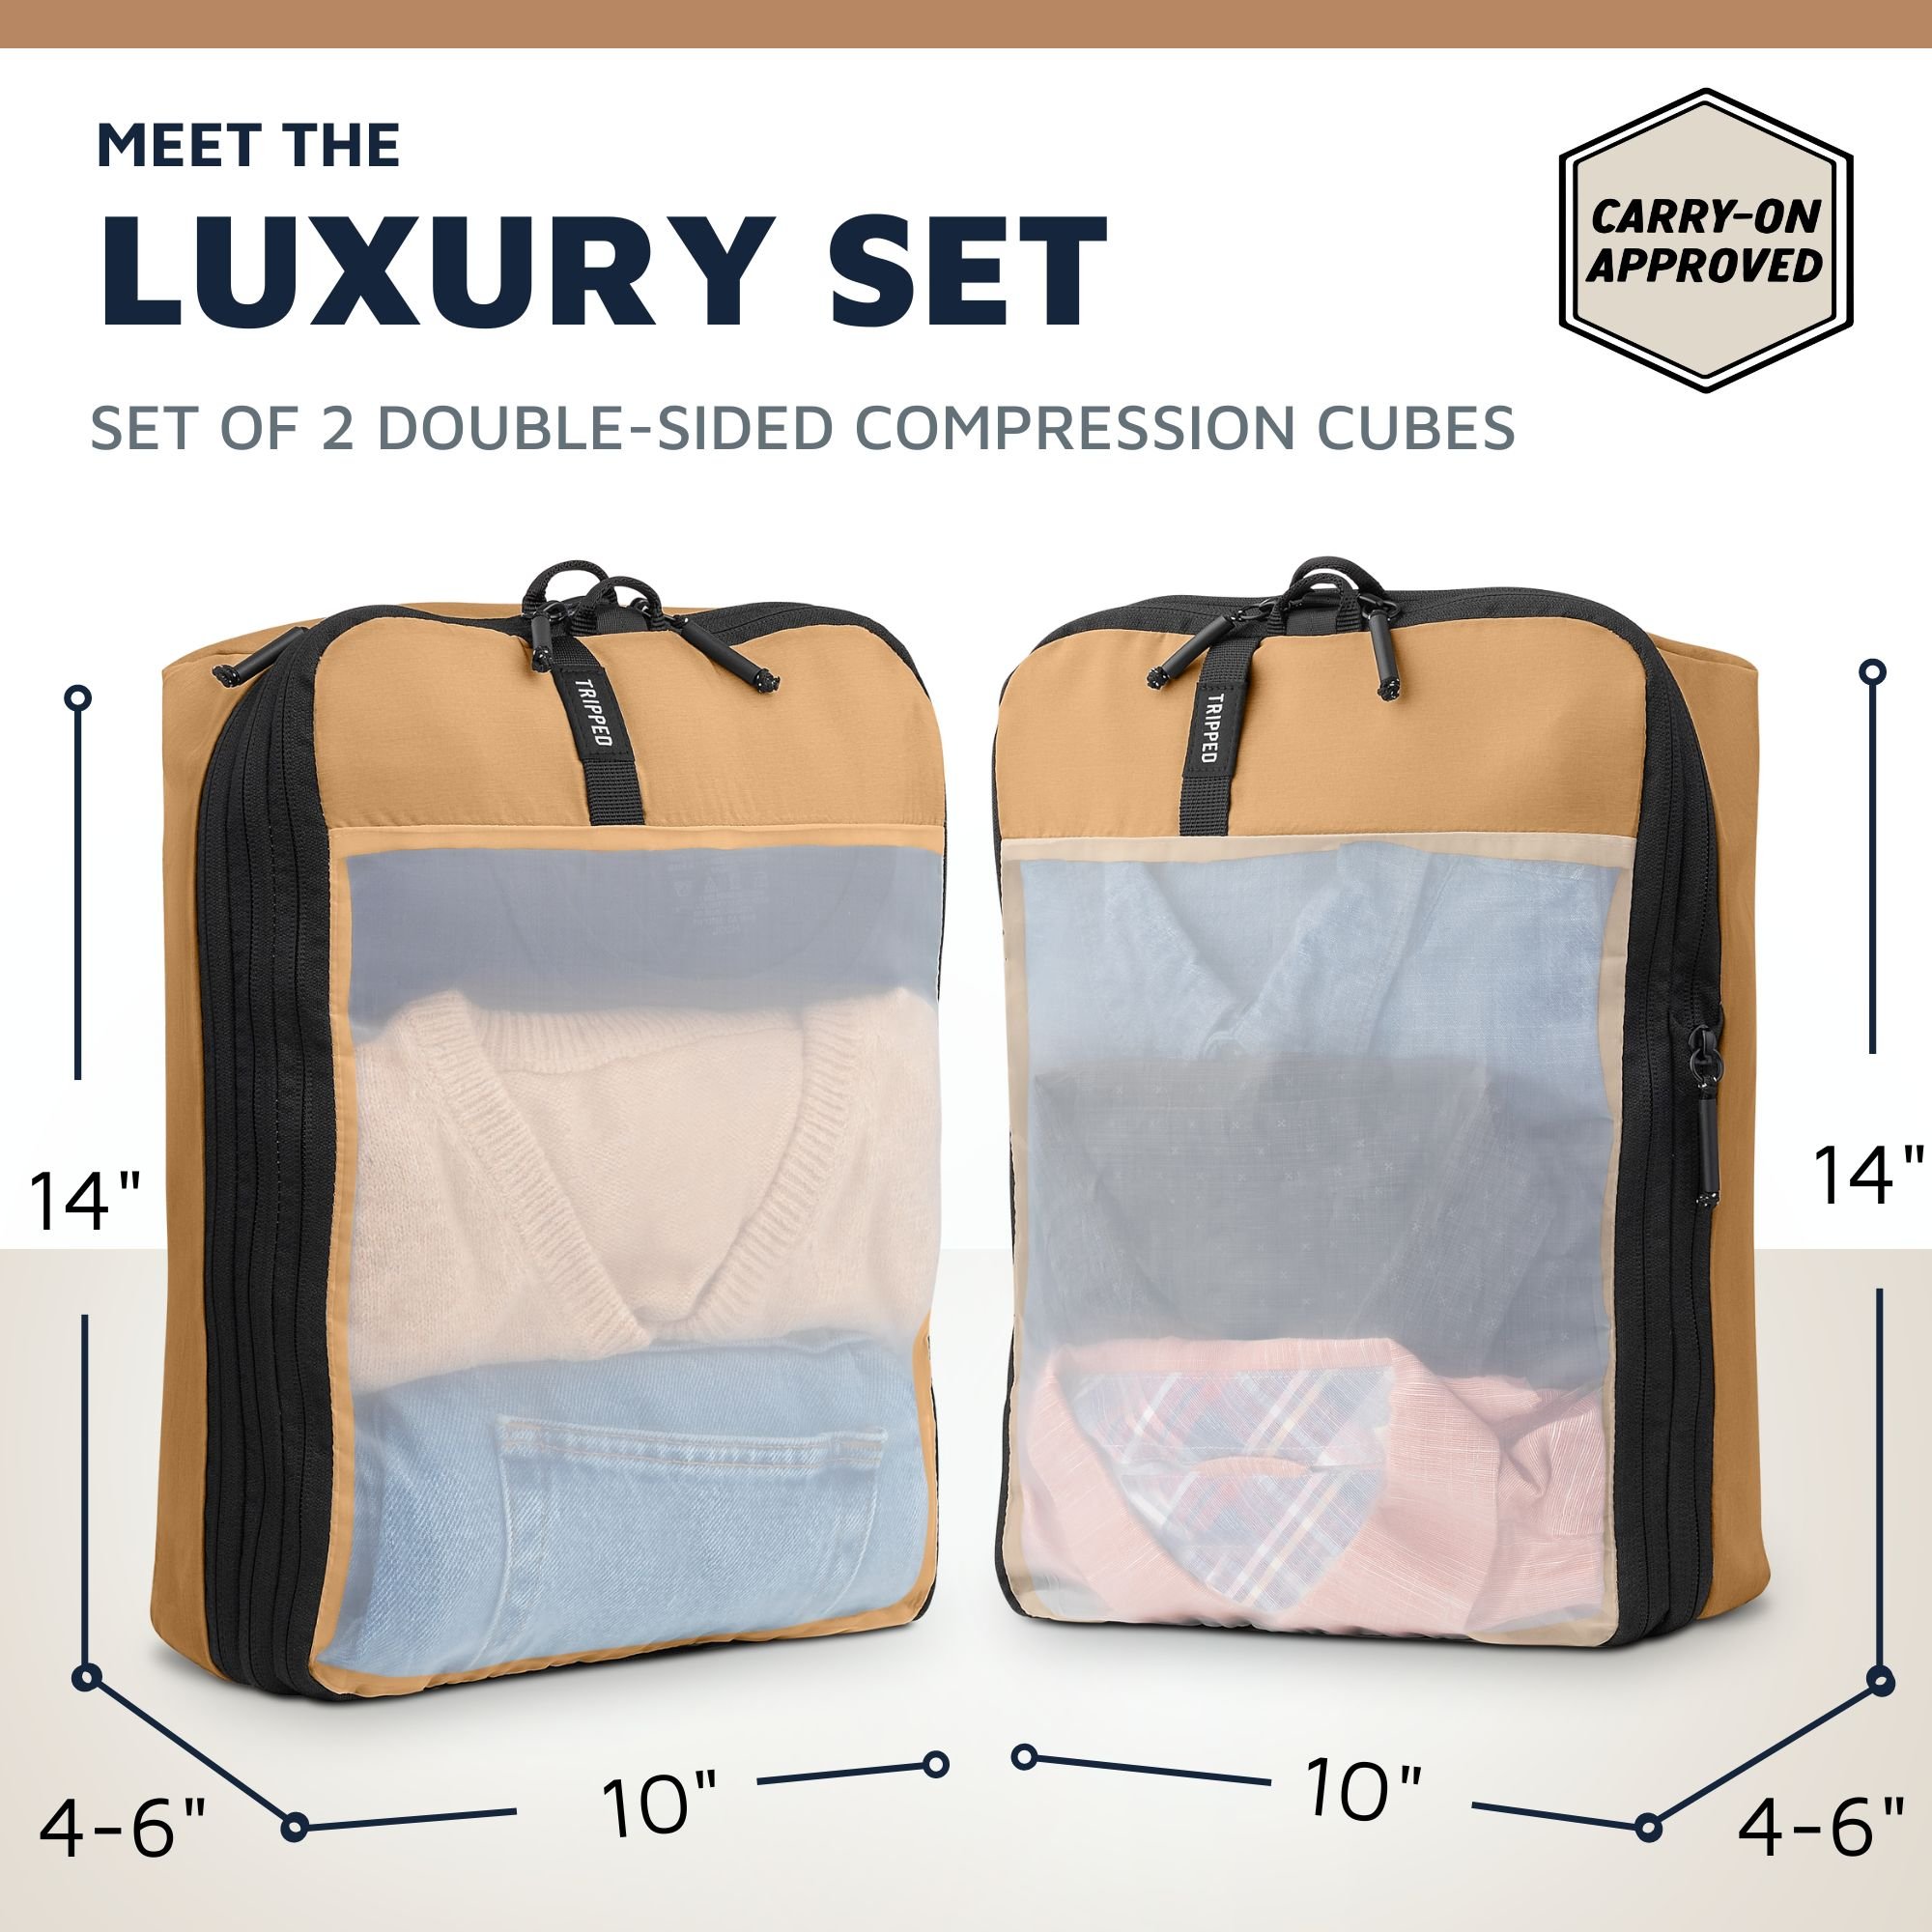 business class packing cubes luxury compression cube tan set.jpg